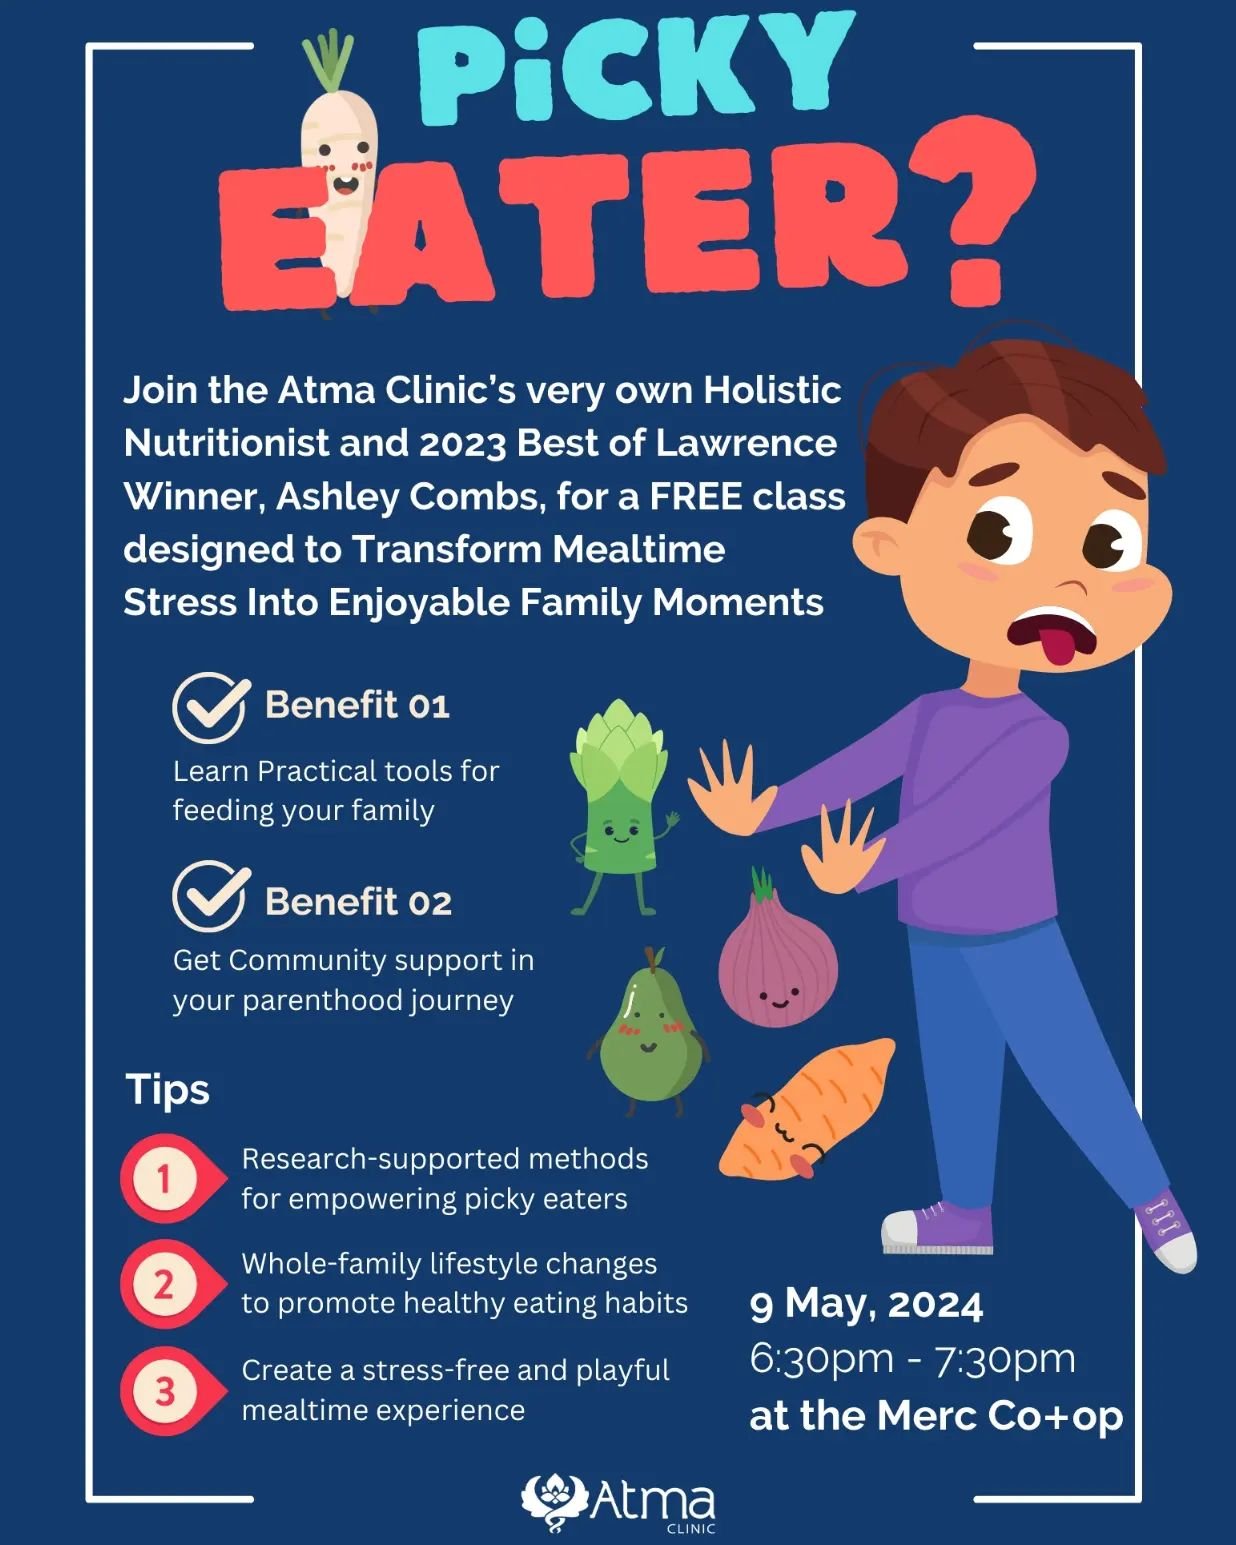 Have a picky eater in your household? We are excited to partner with the @atmacliniclawrenceks to host this free class, presented by Holistic Nutritionist Ashley Combs! You'll learn research-supported methods to create a stress-free, playful mealtime